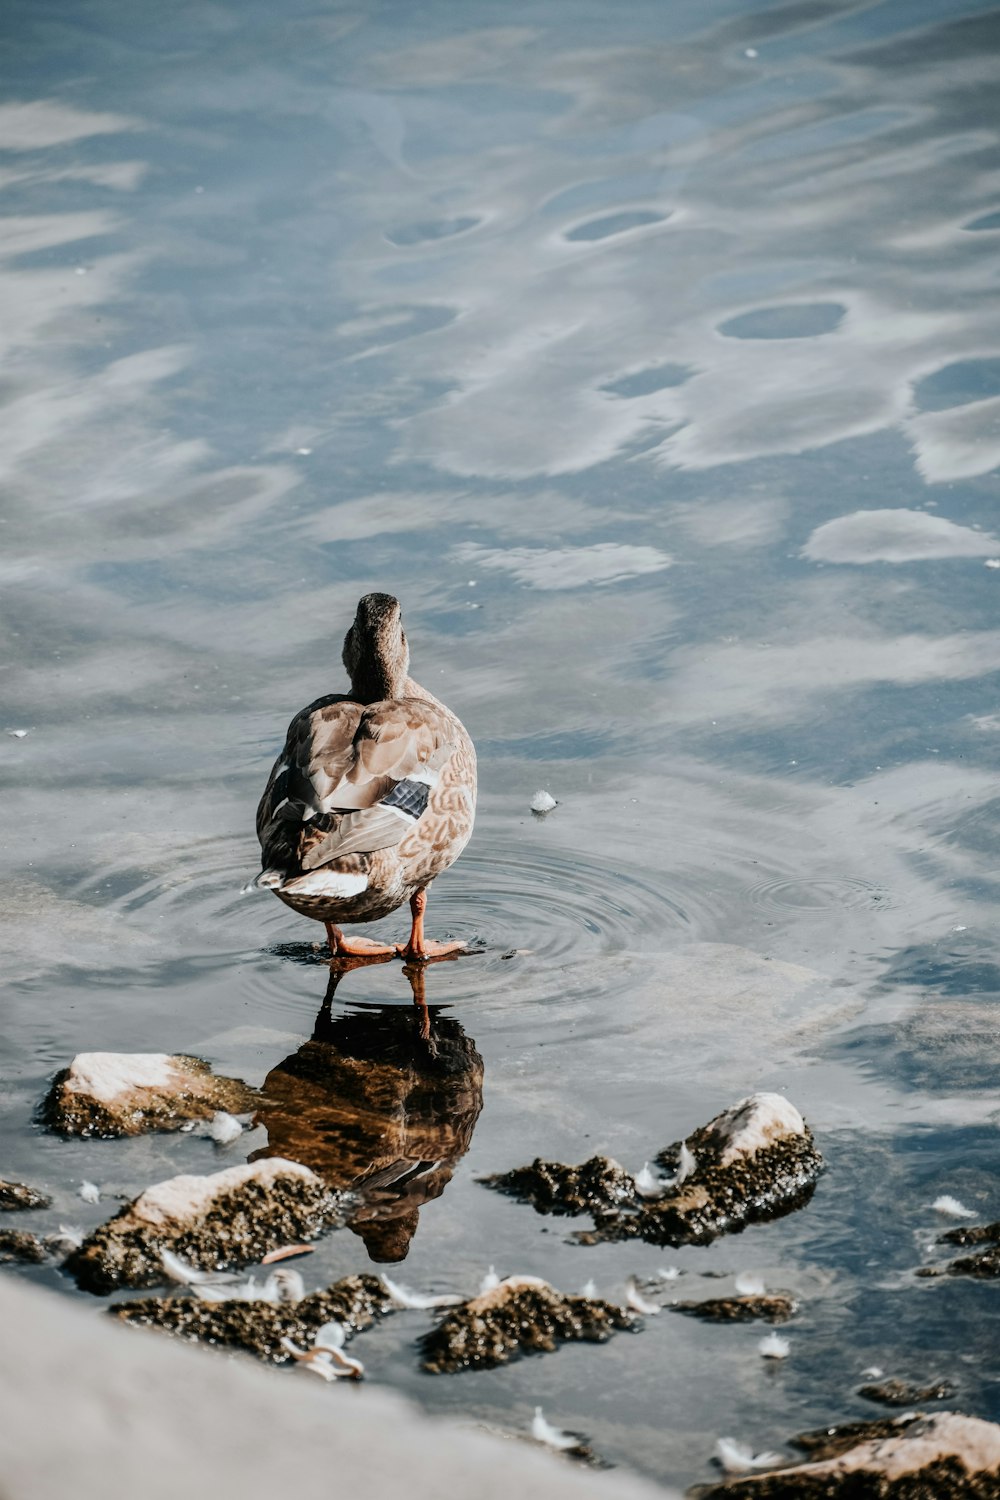 a bird standing on a rock in a body of water